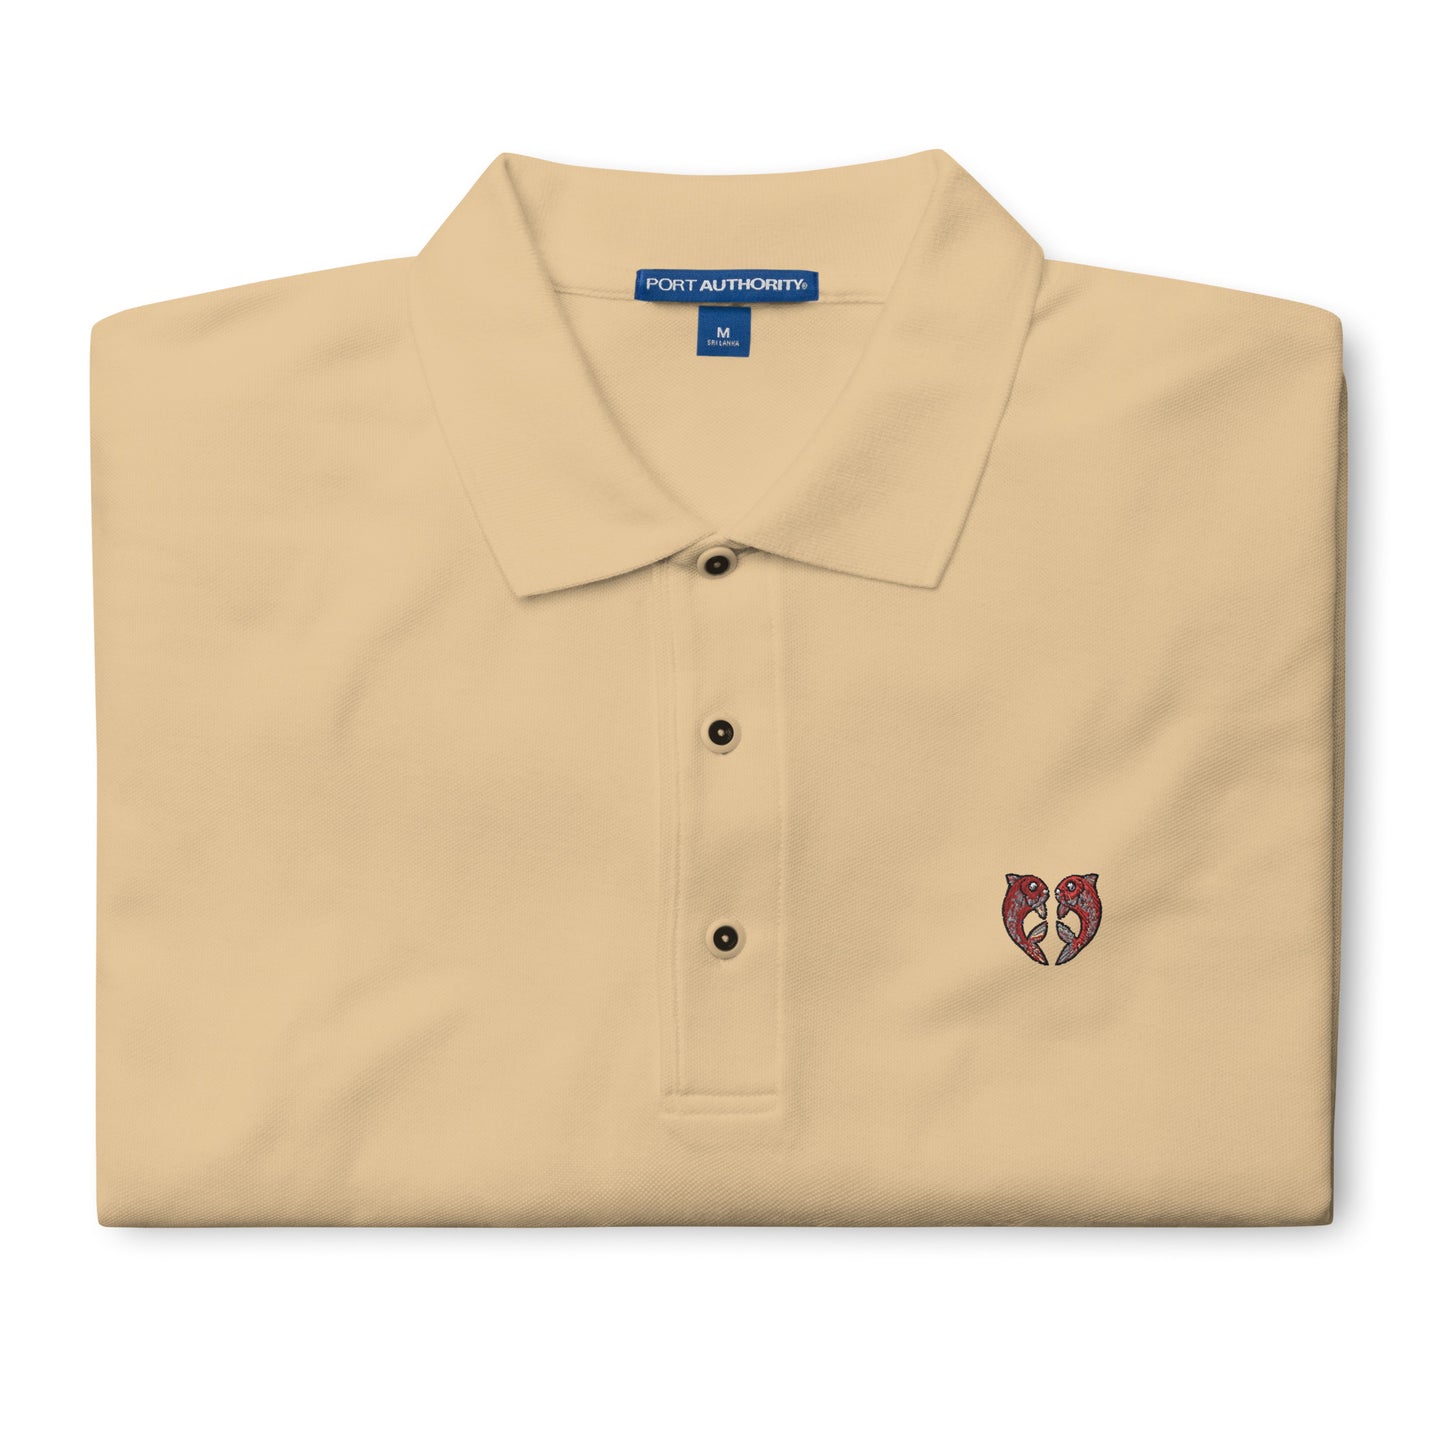 'Kissing Fish' Men's Premium Polo for Valentines Day